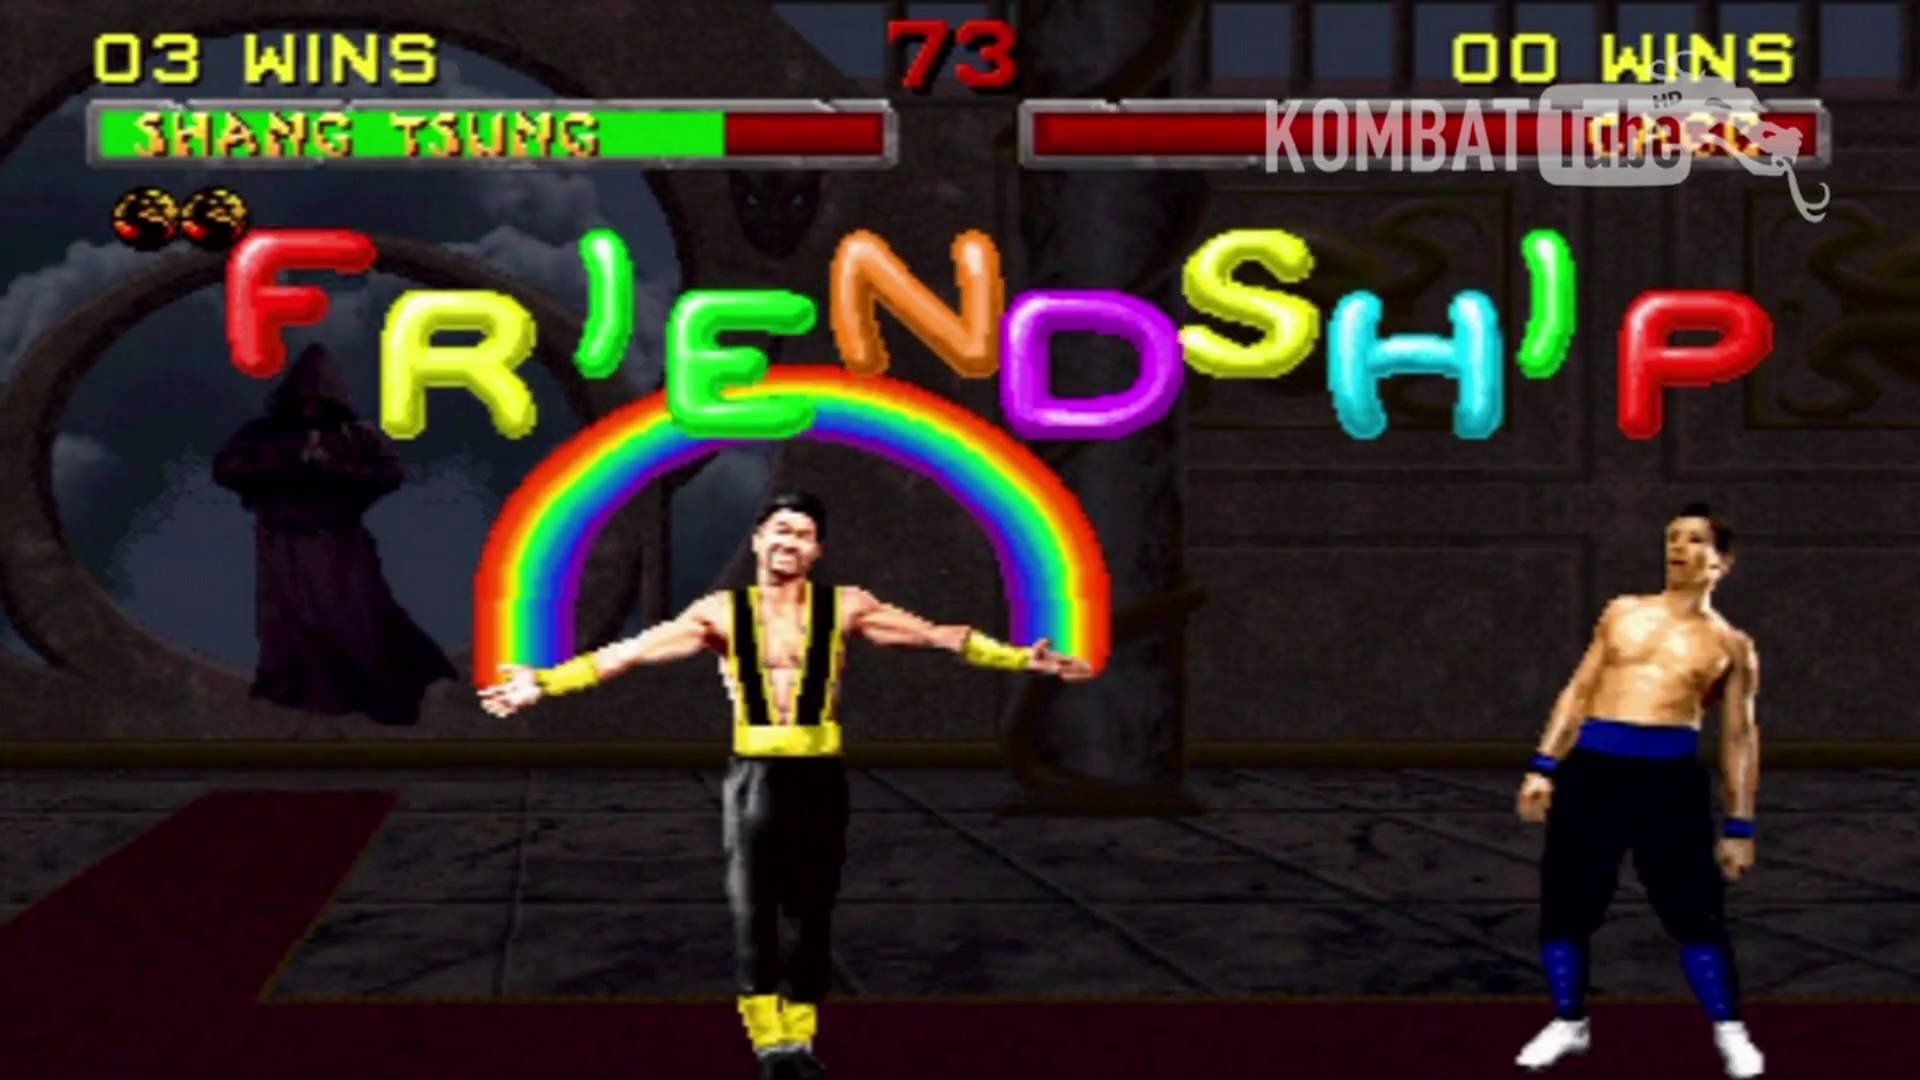 Scoop - Where the Magic of Collecting Comes Alive! - Fatalities and  Friendships in Mortal Kombat II